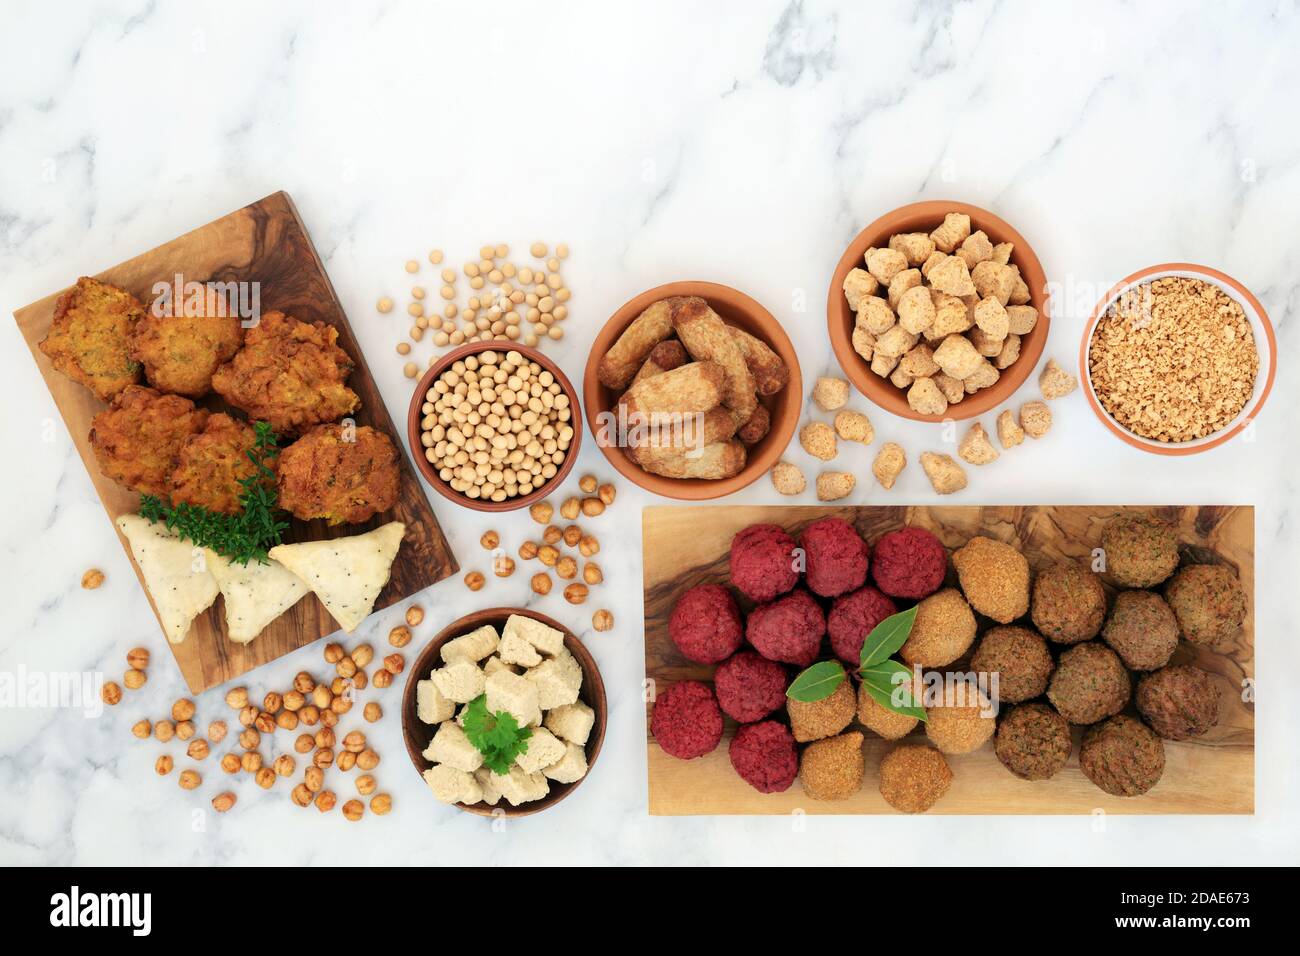 Healthy plant based food for a vegan diet with a variety of tofu balls & sausages, onion bhajis, samosas, soybeans, tvp & bean curd. Ethical eating. Stock Photo